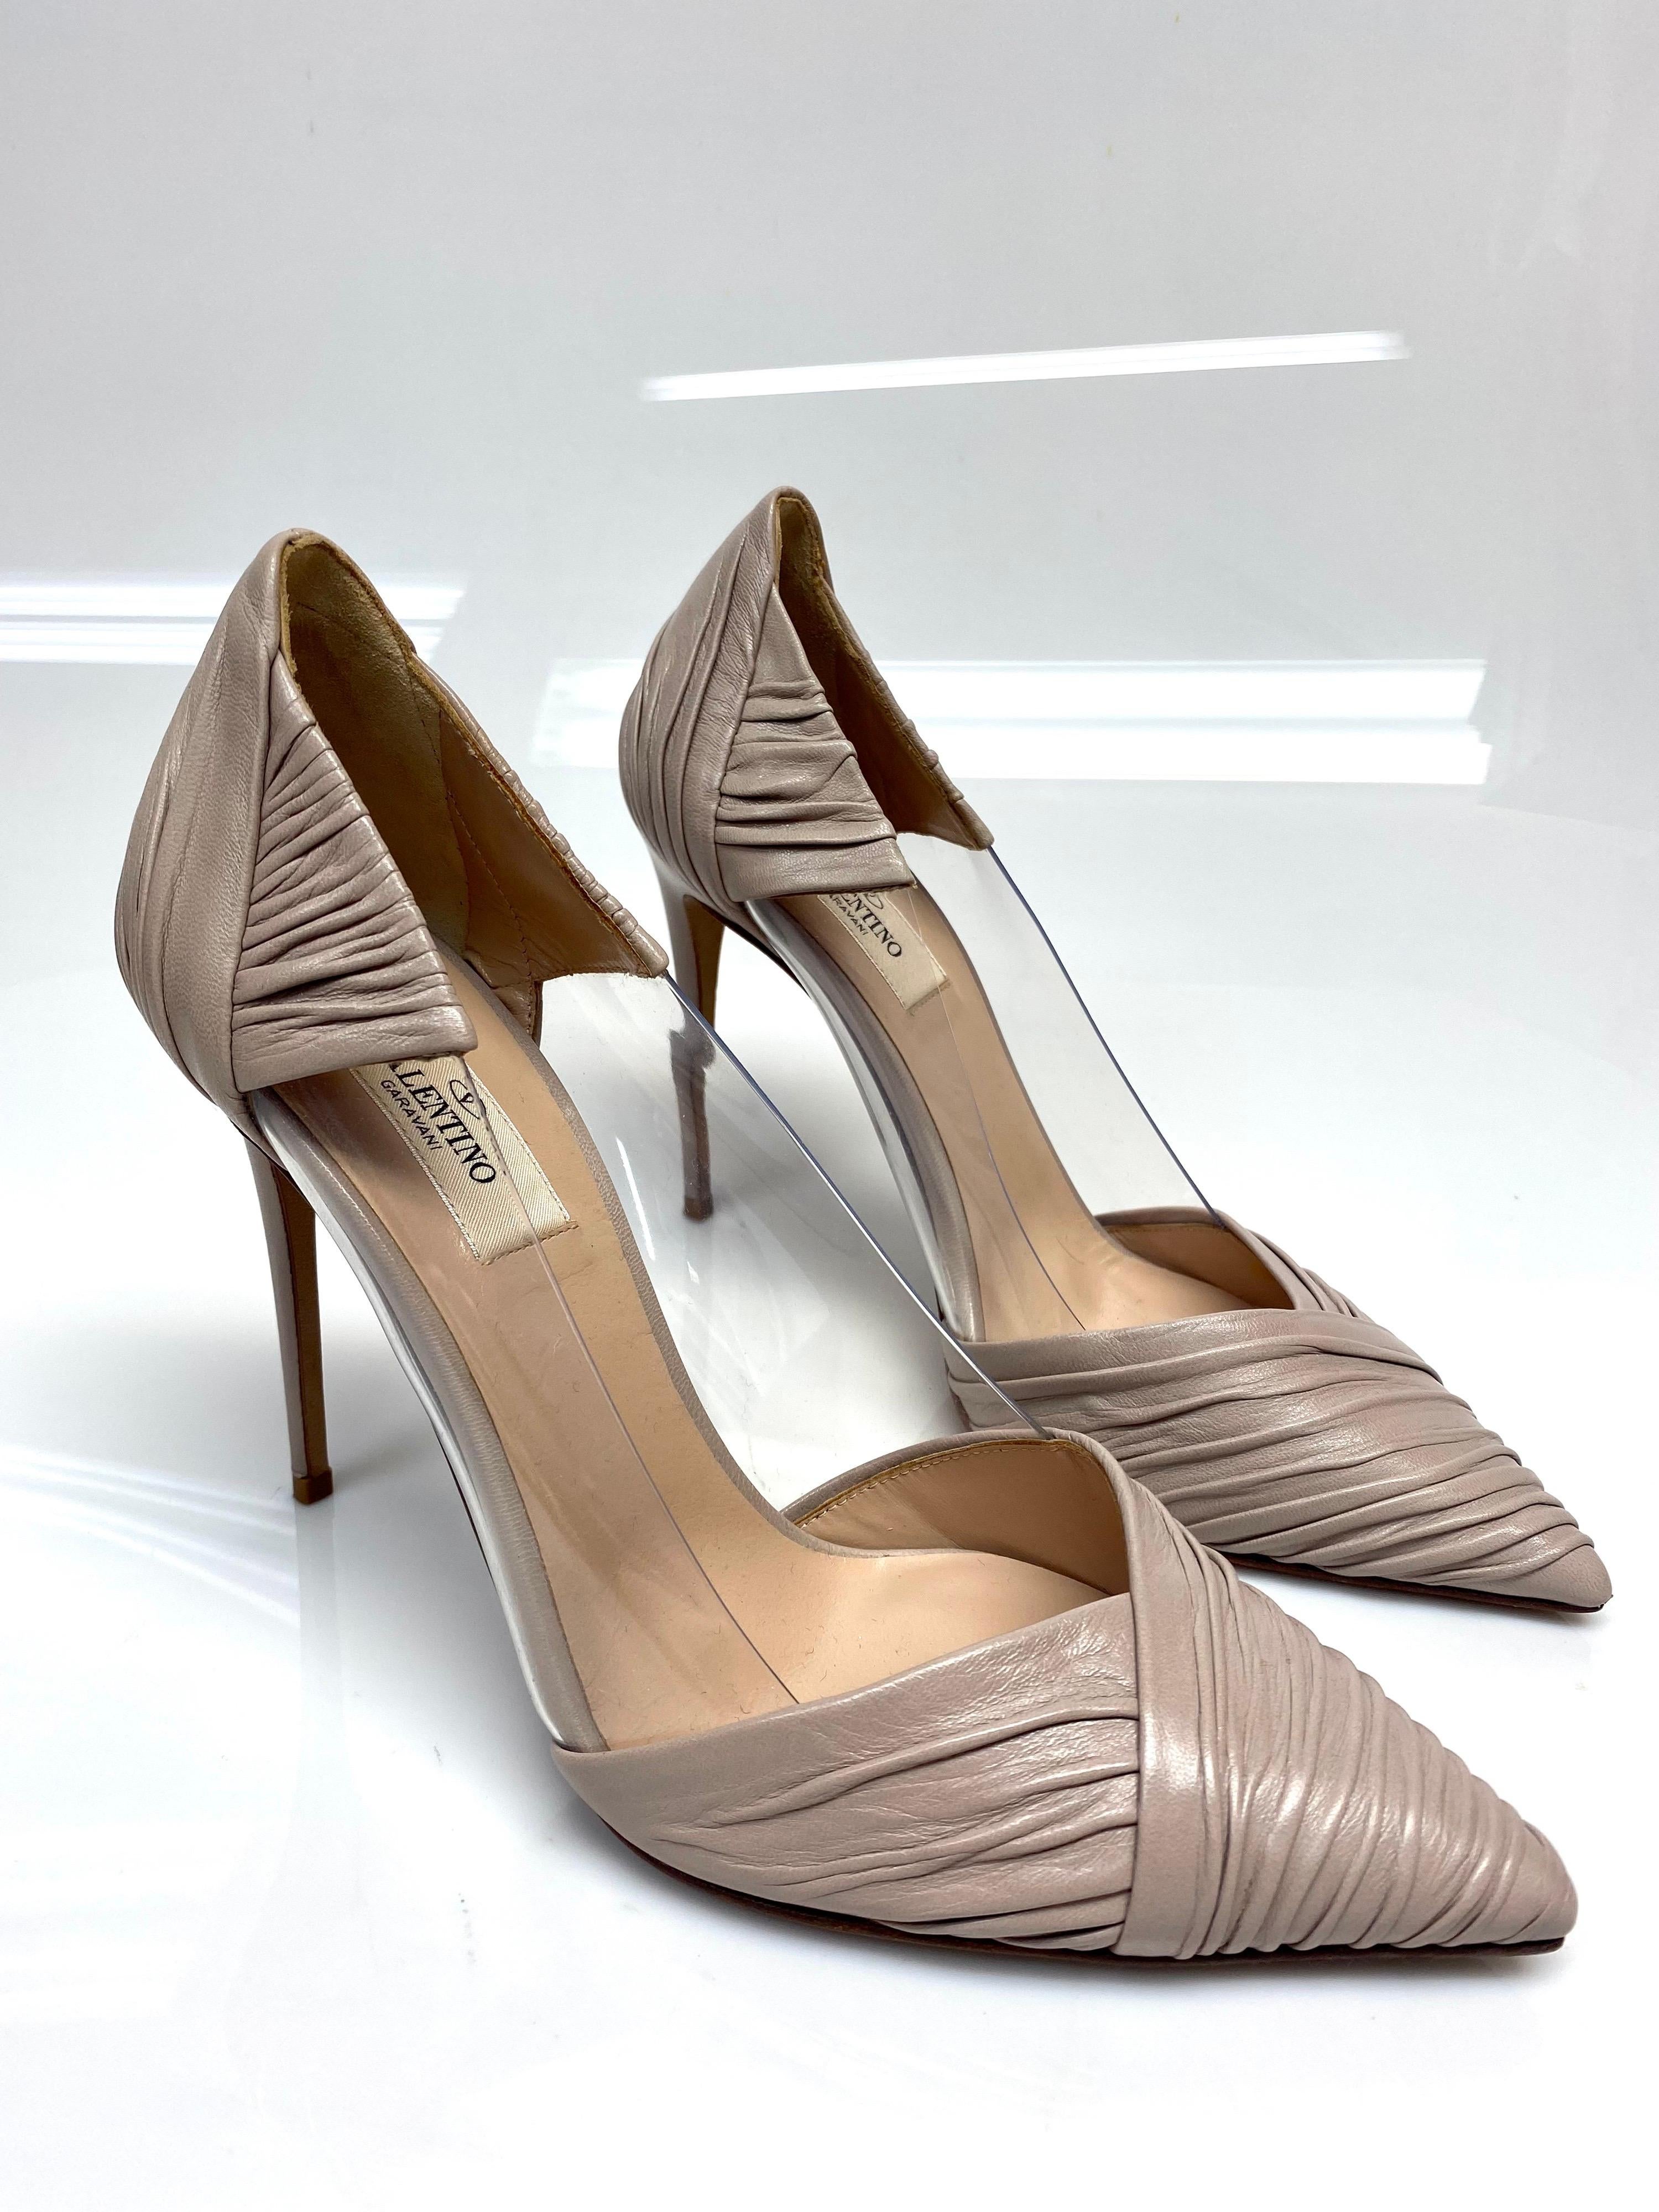 Valentino Nude Ruched Leather Perspex Plastic Heels Pumps Size 37.5. These gorgeous creations from Valentino are the 